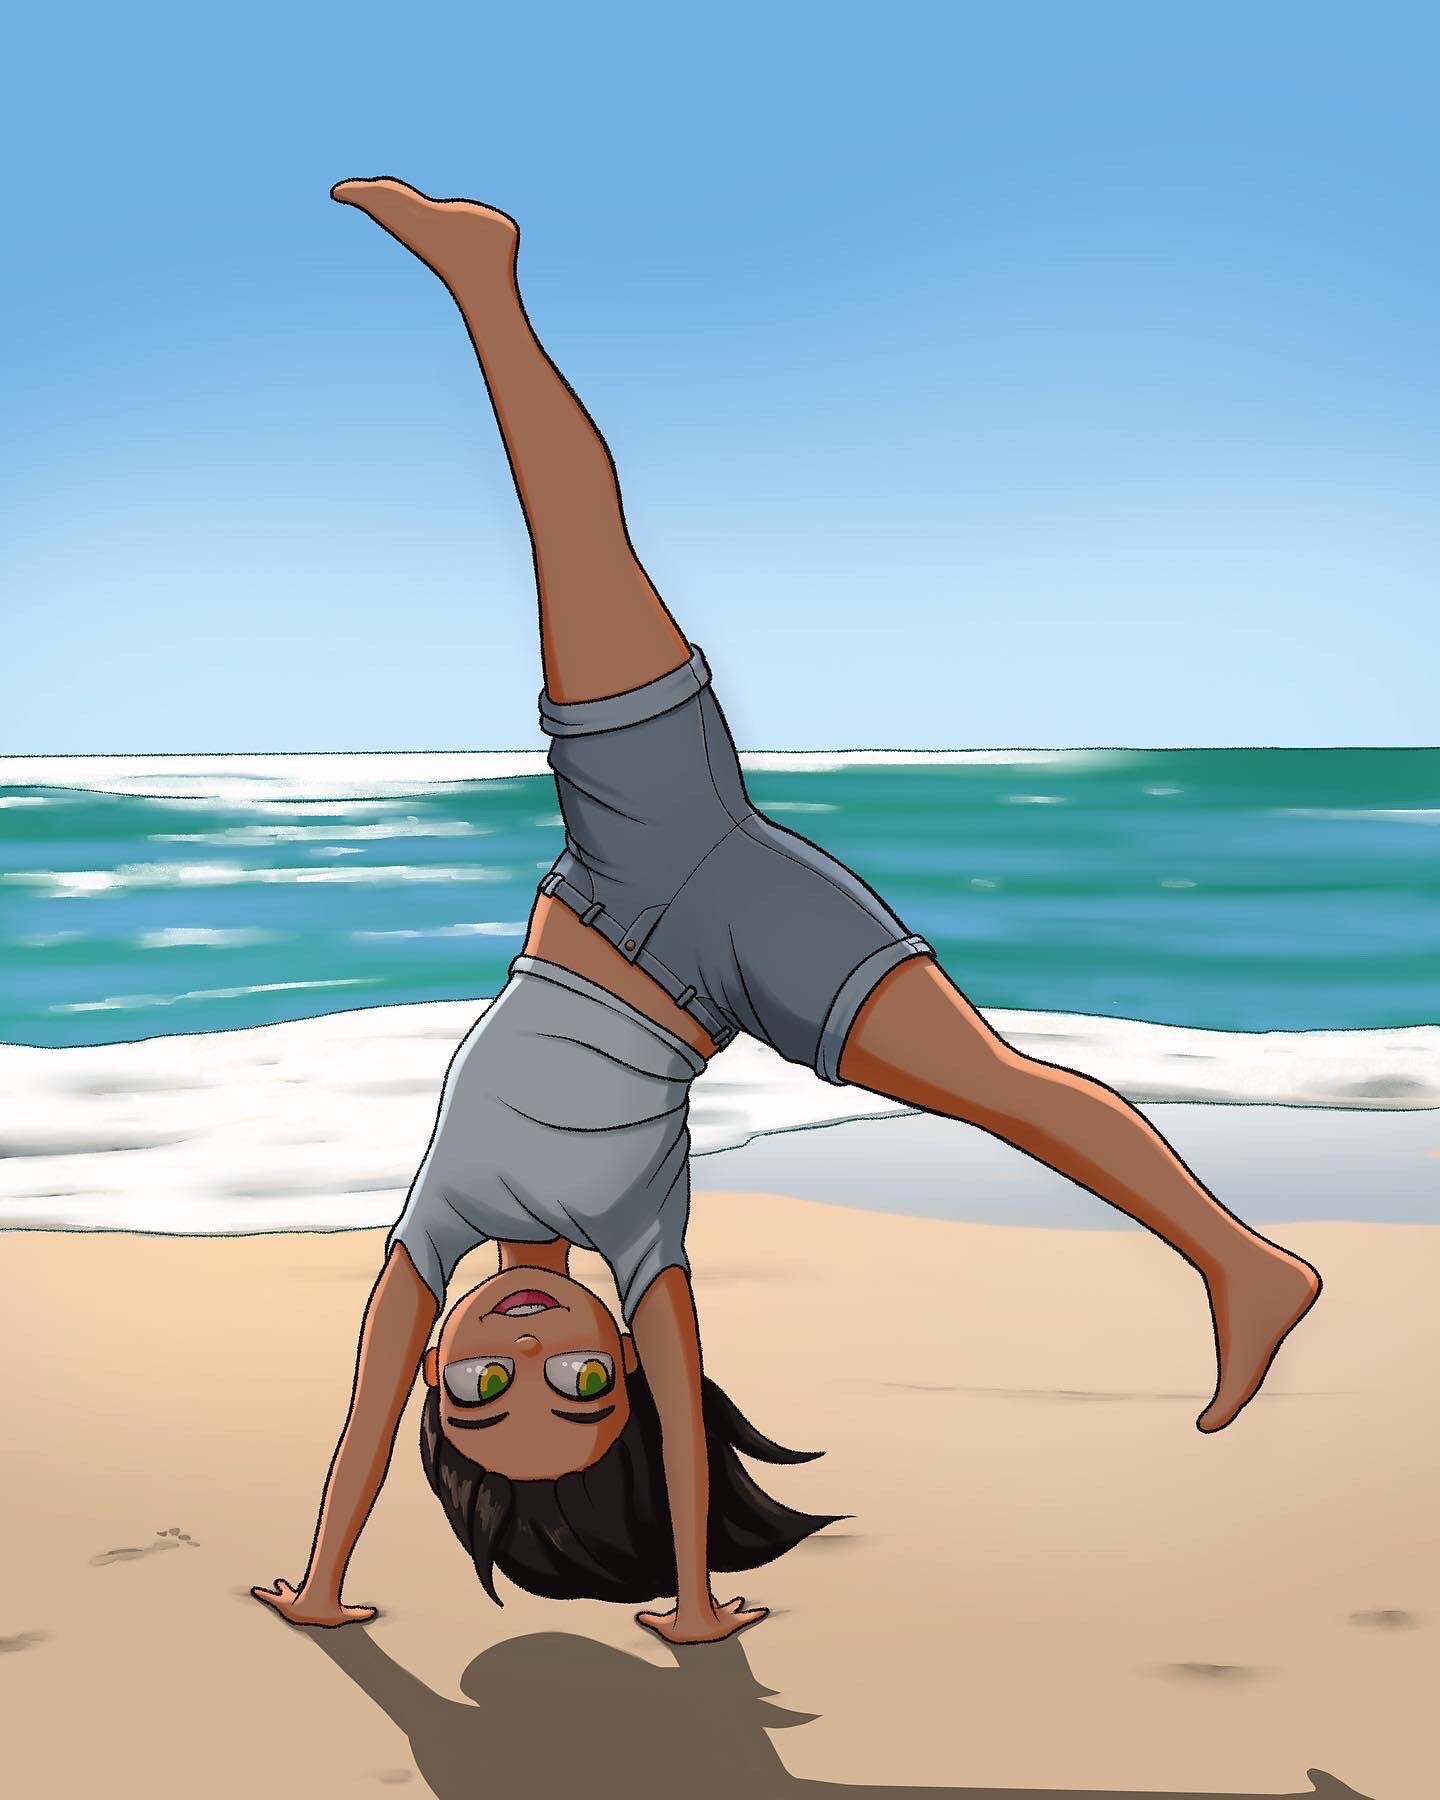 Legacy Gymnastics Academy  37730978-summer-time-in-beach-sea-shore-with-realistic-objects-vector-illustration  - Legacy Gymnastics Academy